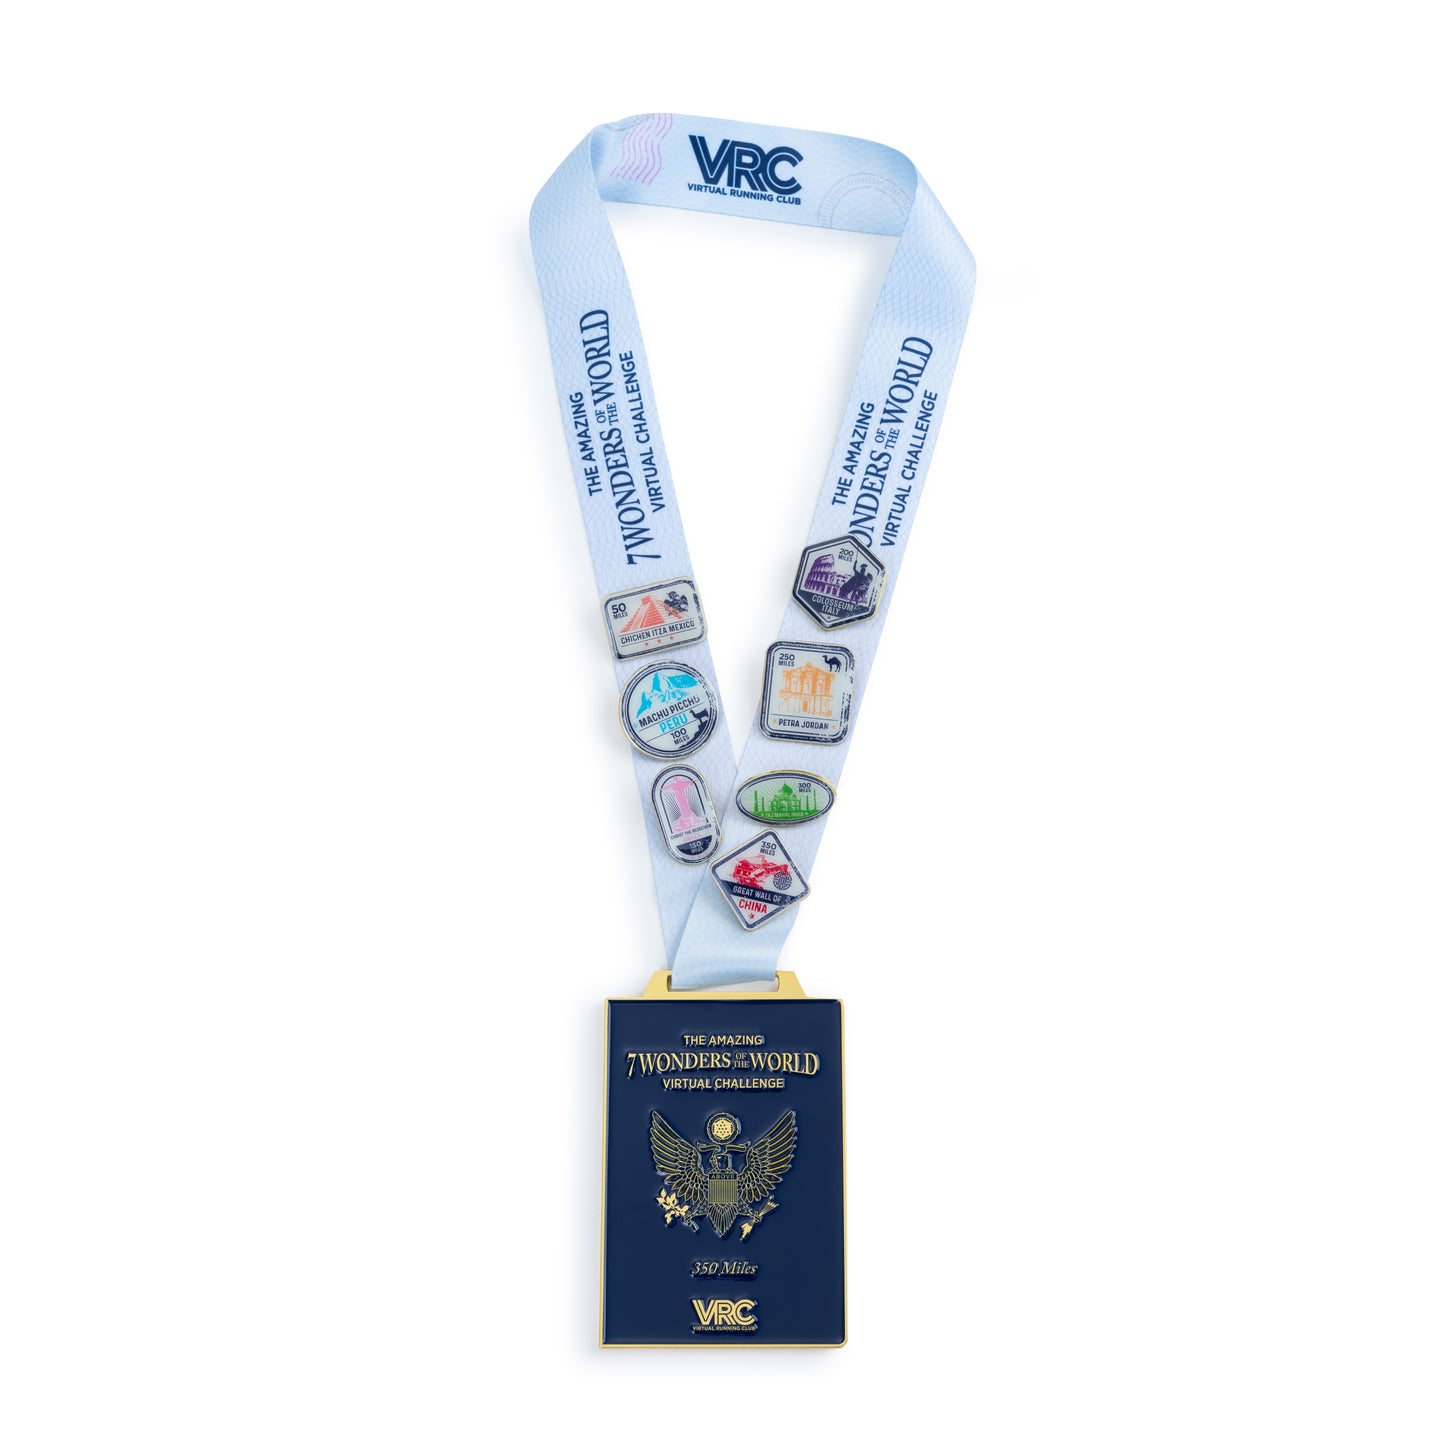 Last Chance: The Amazing 7 Wonders of the World Fitness Challenge Medal & Pins Bundle